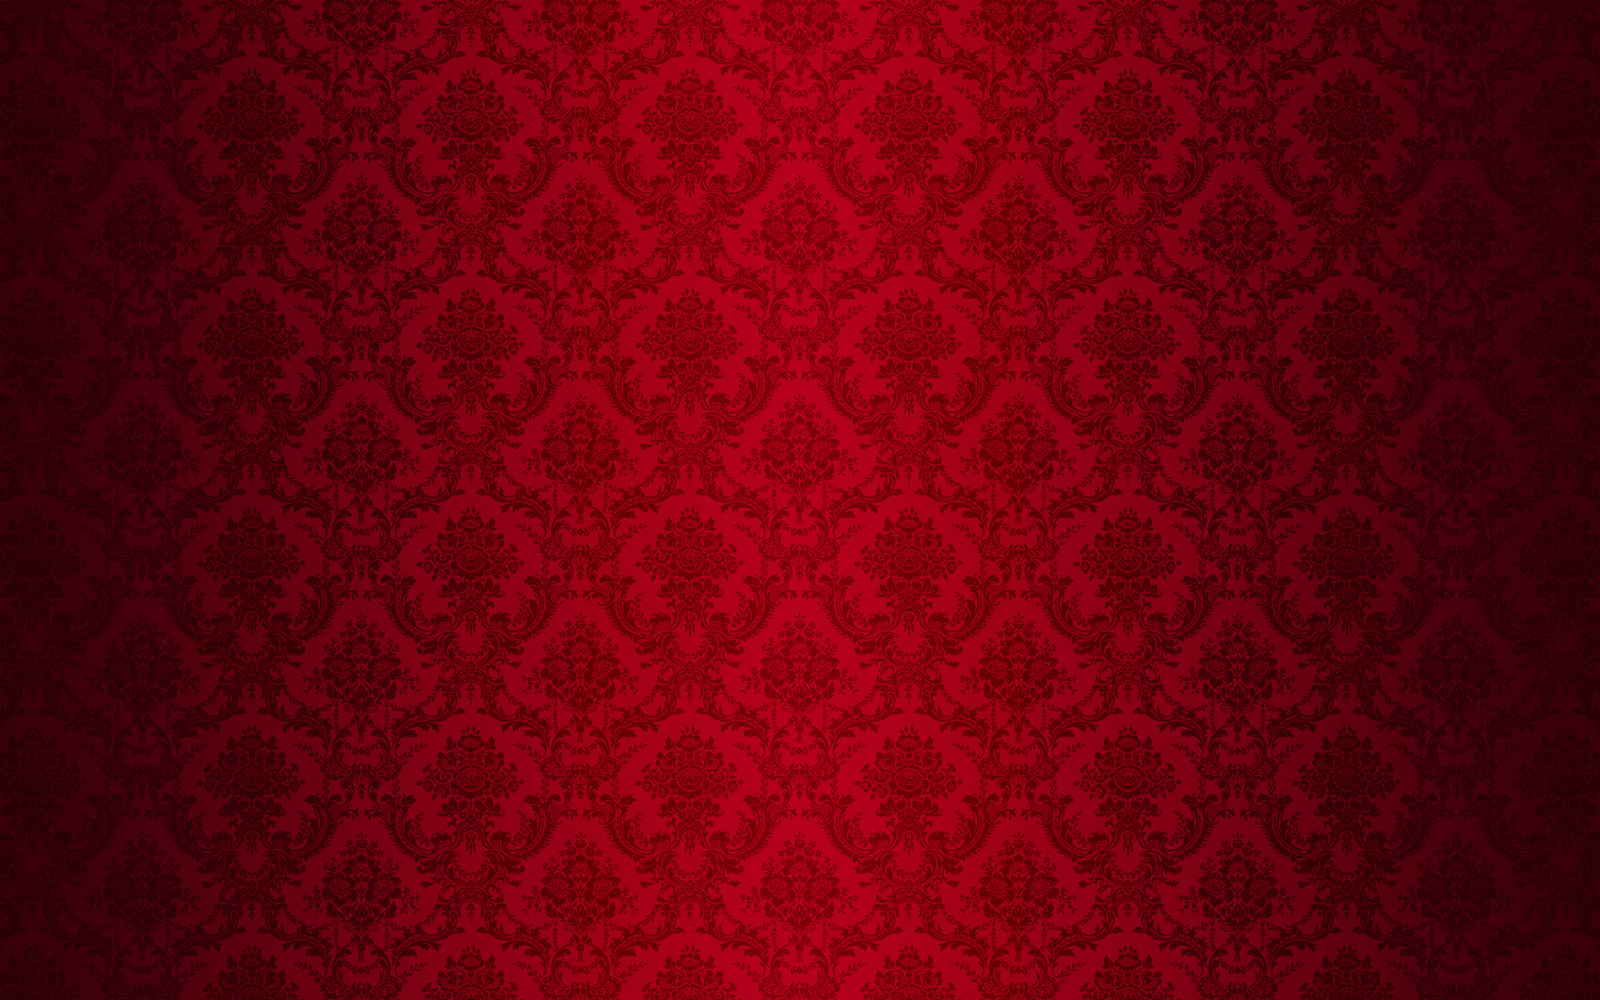 Purple Damask Full HD Background Vintage Red Wallpaper With